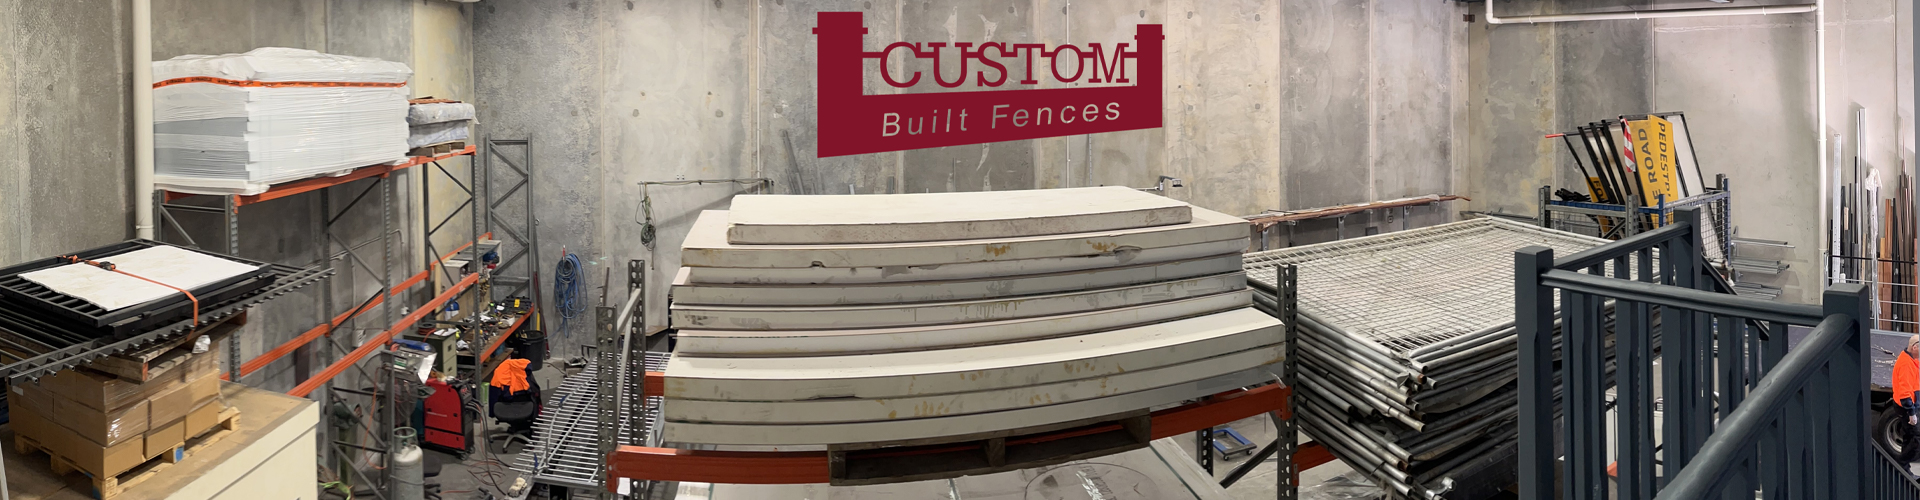 Custom Built Fences large factory space in Bayswater